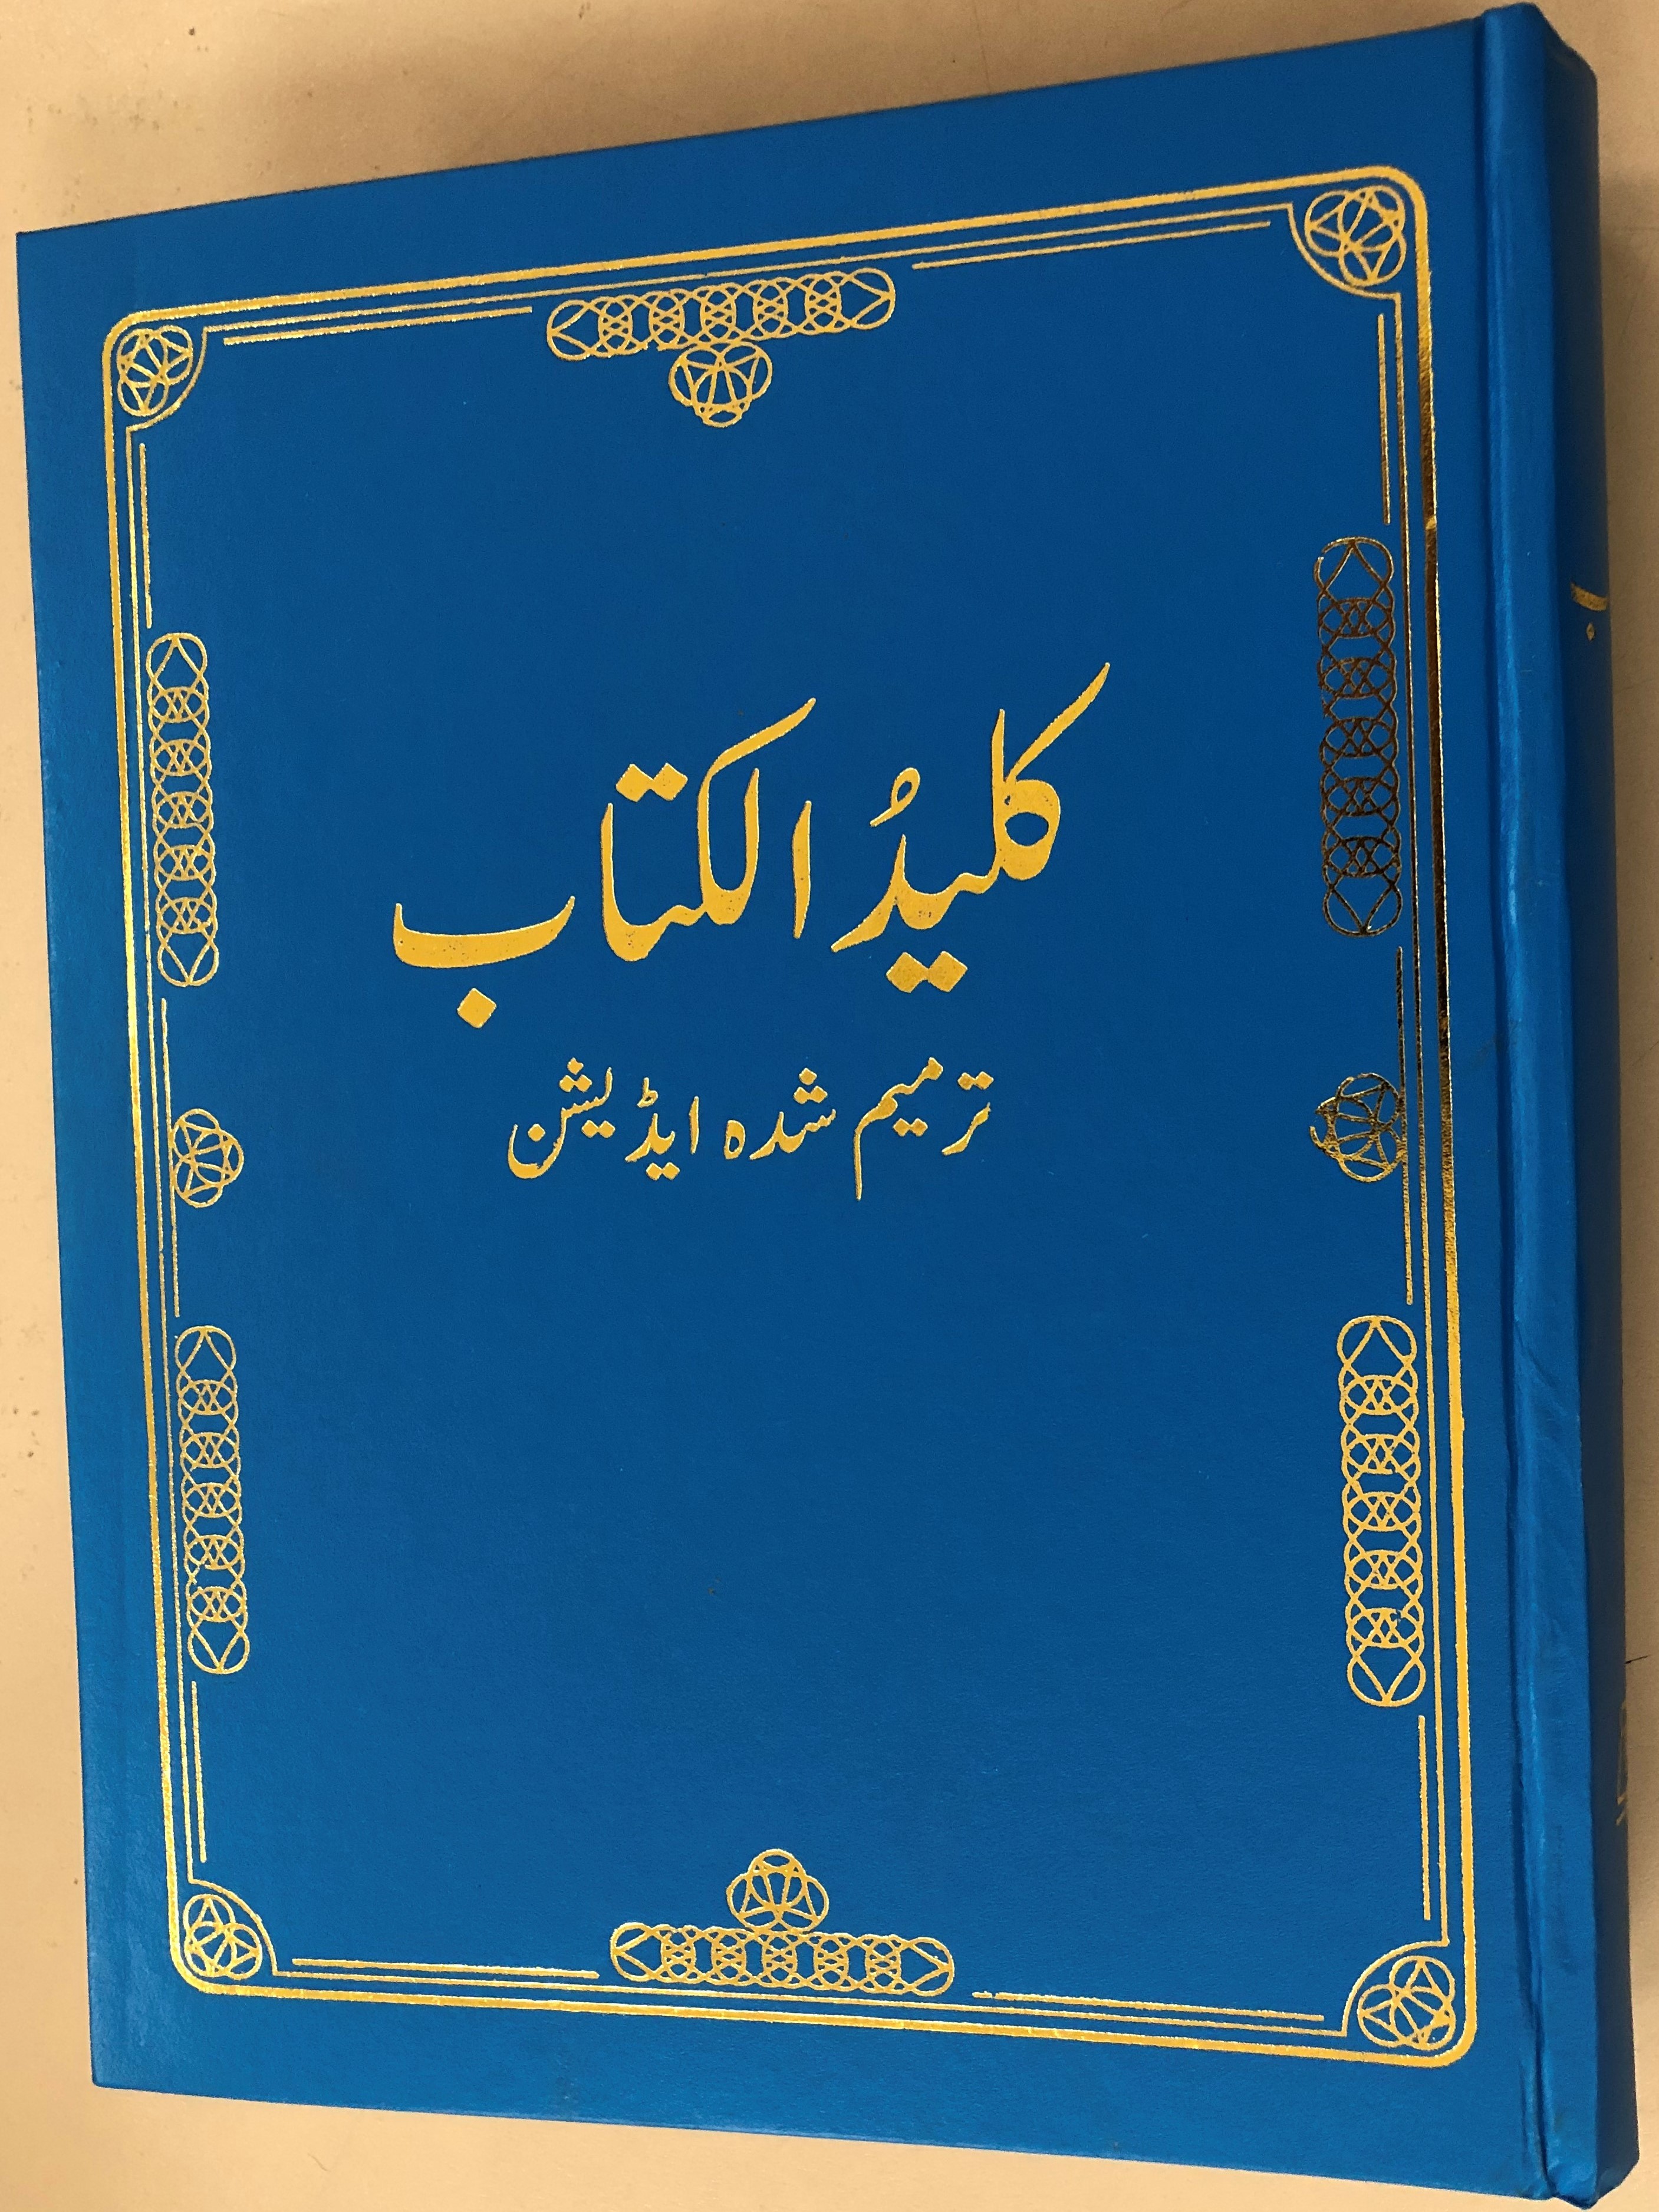 urdu-large-bible-dictionary-blue-cover-by-f.s.-khair-ullah-with-5.000-subjects-from-the-bible-hardcover-with-illustrations-maps-and-diagrams-1-.jpg